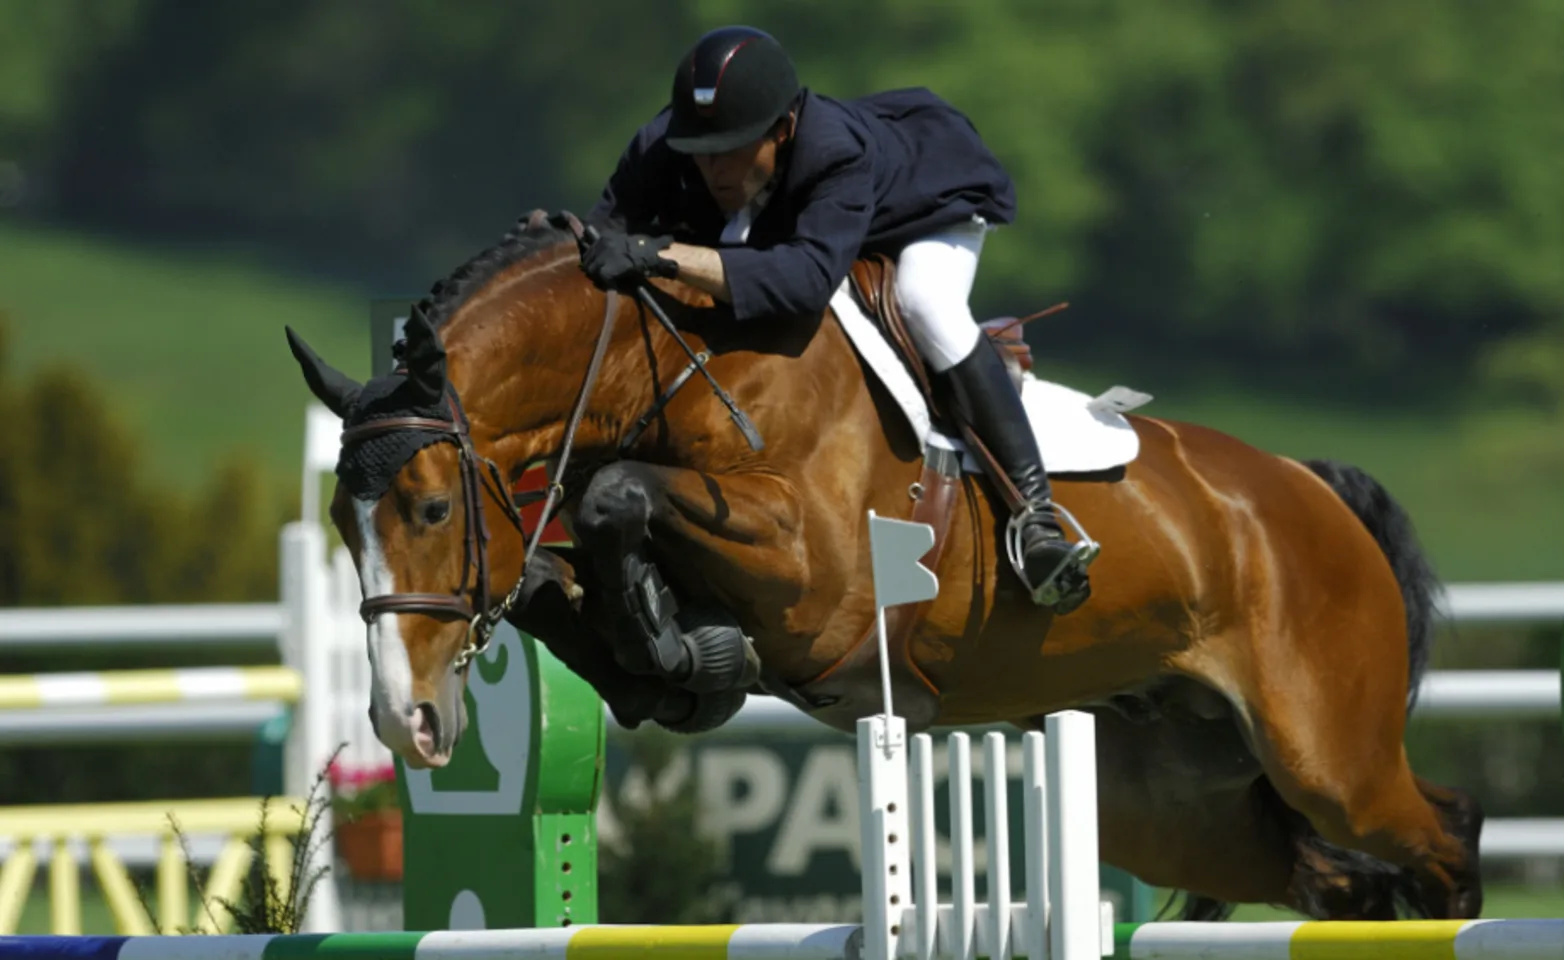 Rider with Horse Jumping During a Show